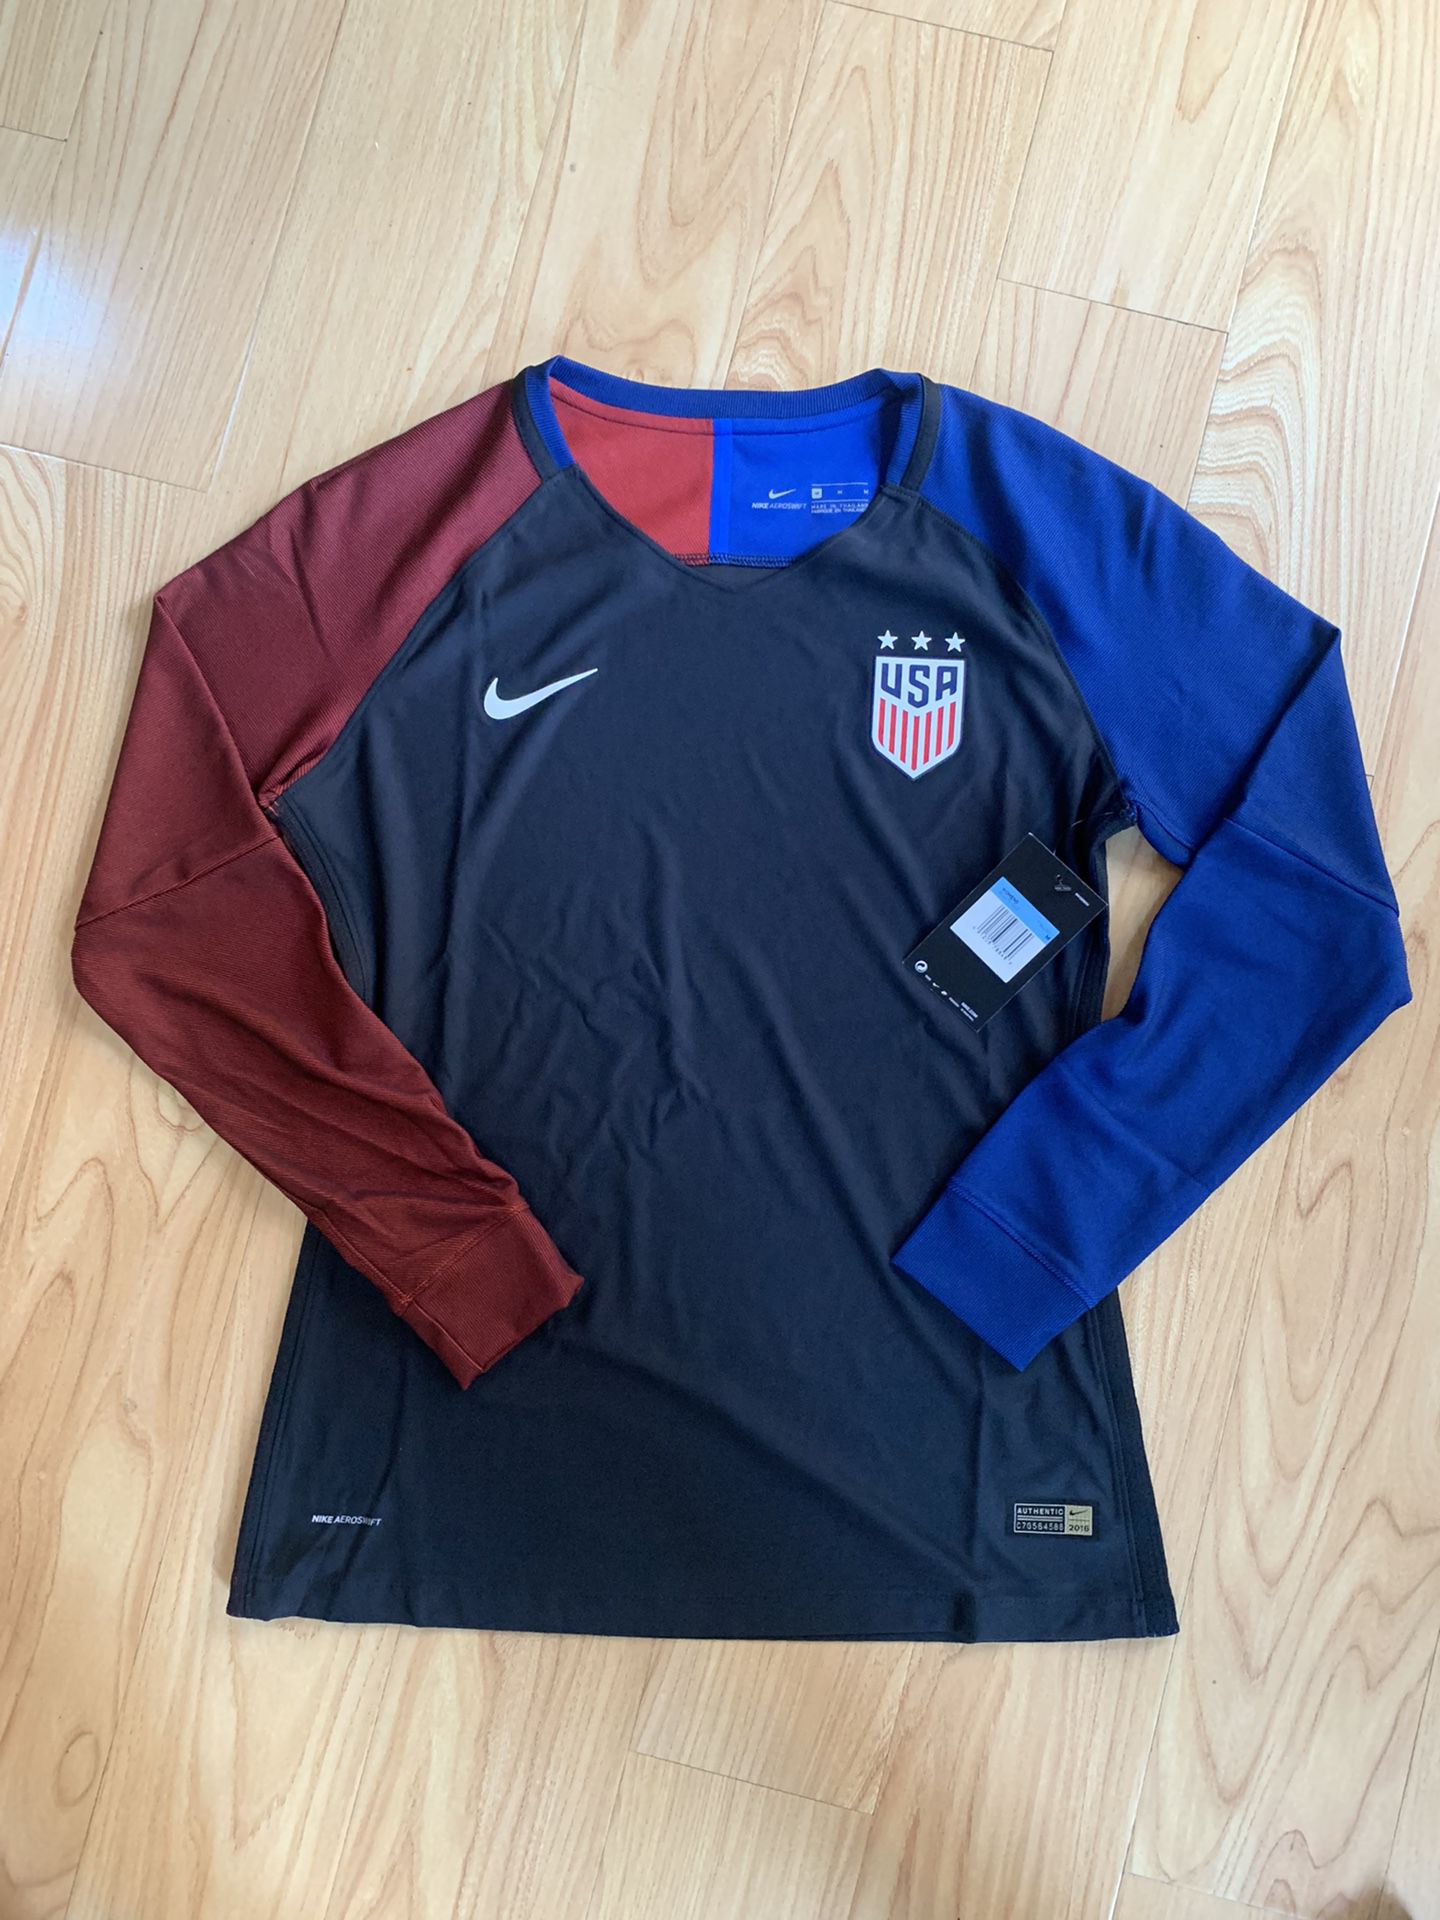 Mareo melón Aproximación Nike Aeroswift 2016 USA NWT Long Sleeve Jersey for Sale in Anaheim, CA -  OfferUp